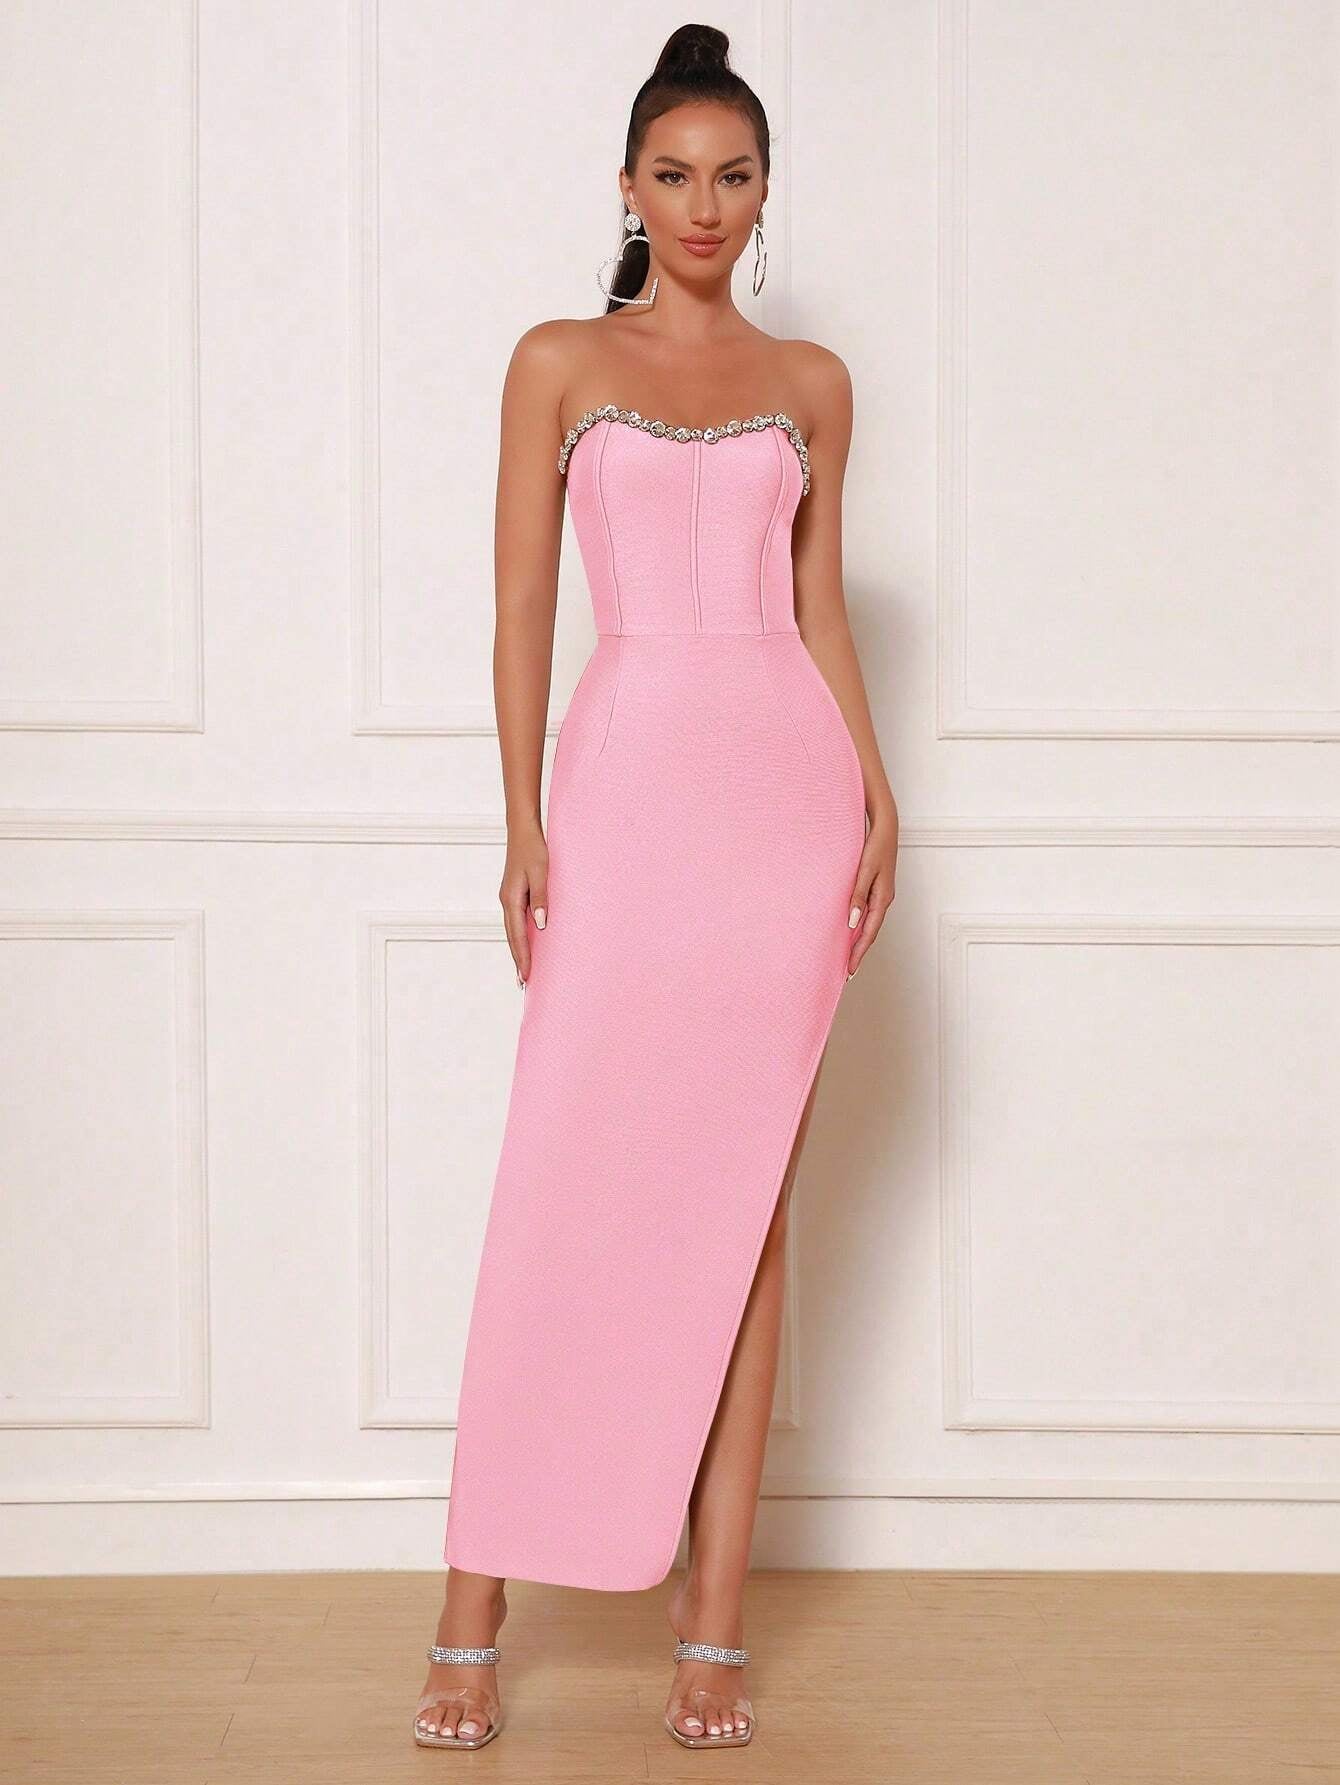 Modphy Women's Sexy Pink Strapless Bandage Dress with Split and Rhinestone Detailing, Perfect for Parties and Formal Occasions.